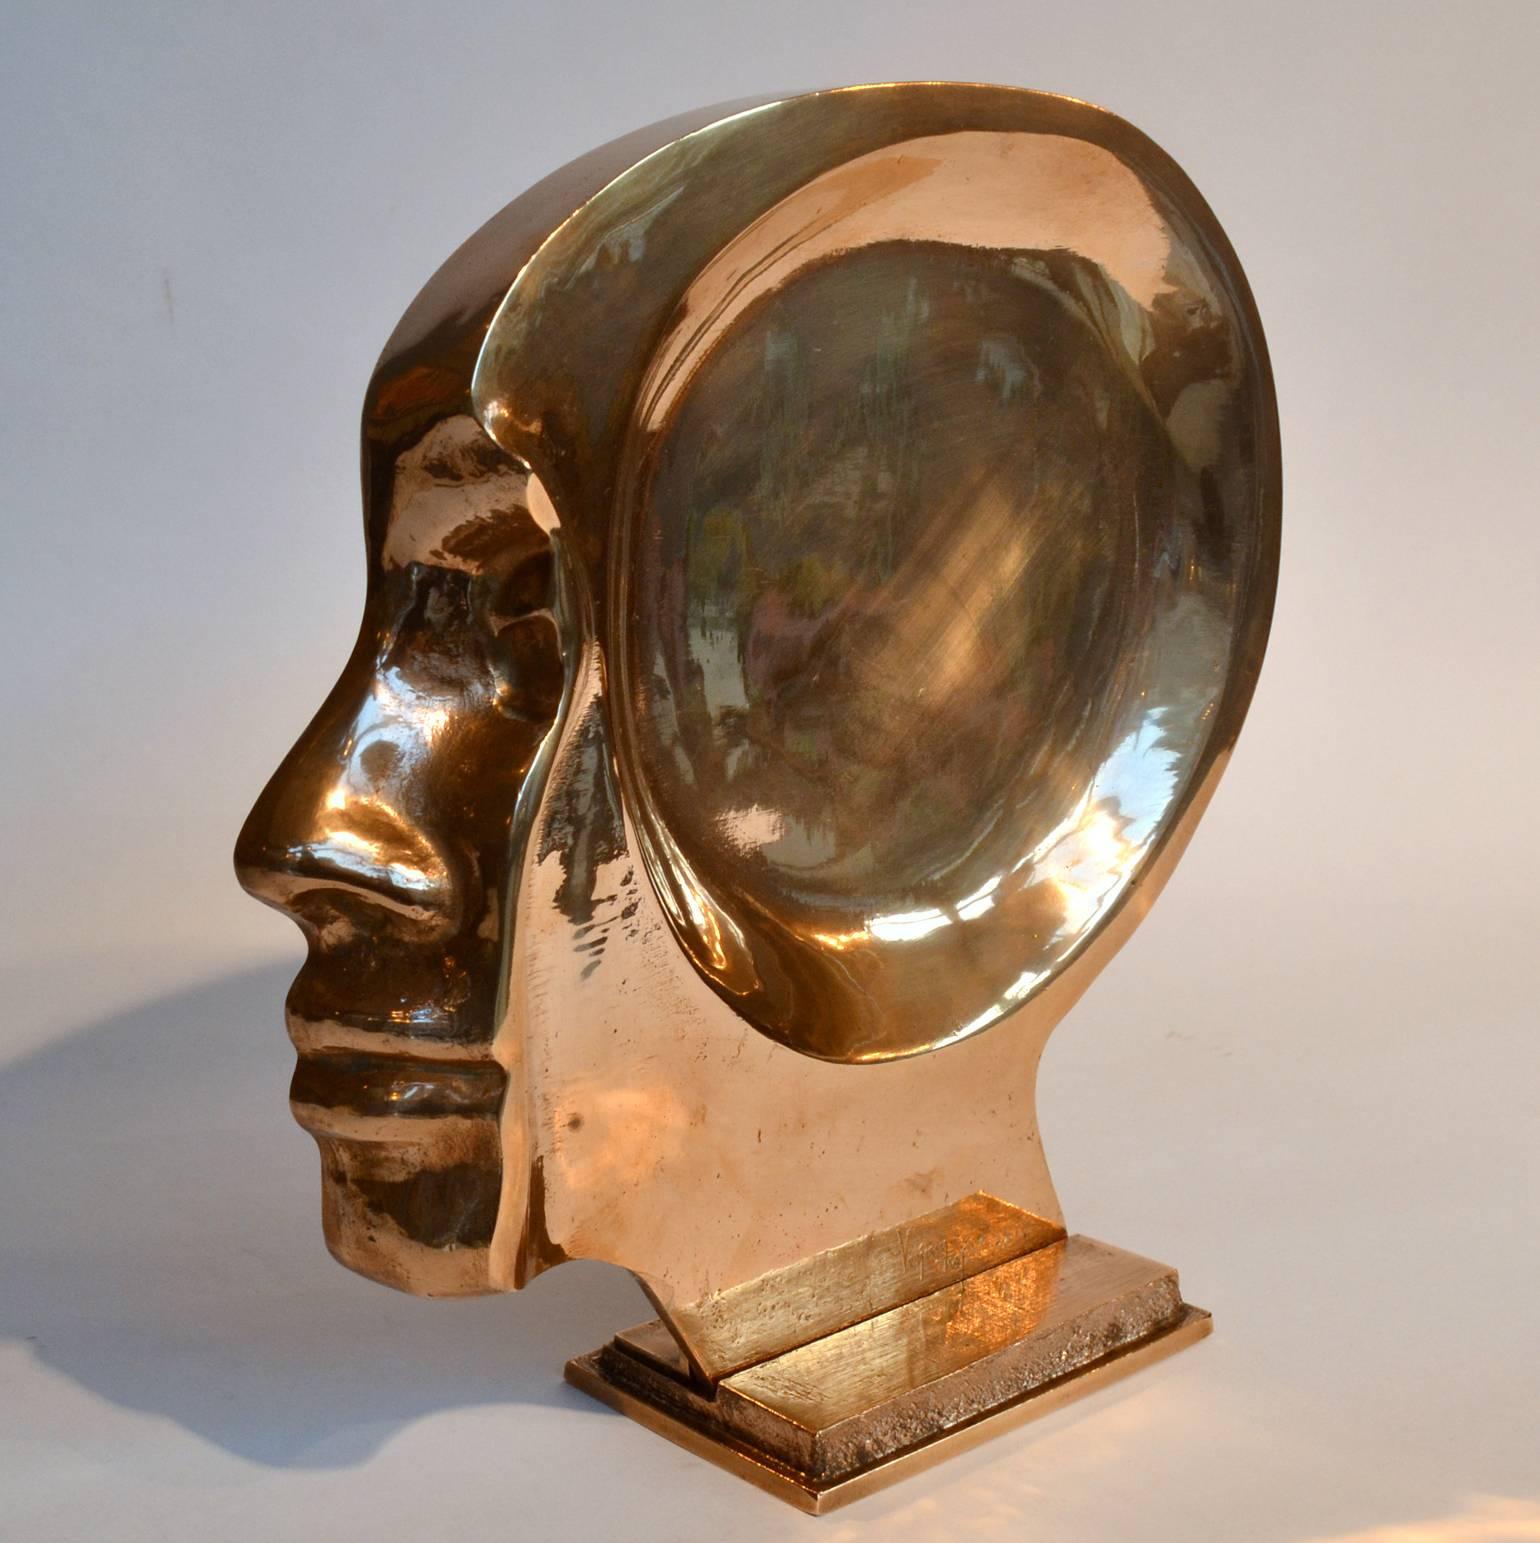 Sculpture of face in silhouette that that becomes a tray when taken of its stand becomes quite surreal. It is cast in bronze and has a high polished finish. It is made in limited edition of 100 signed Raf Verjans. Raf is a Belgium artist, born in